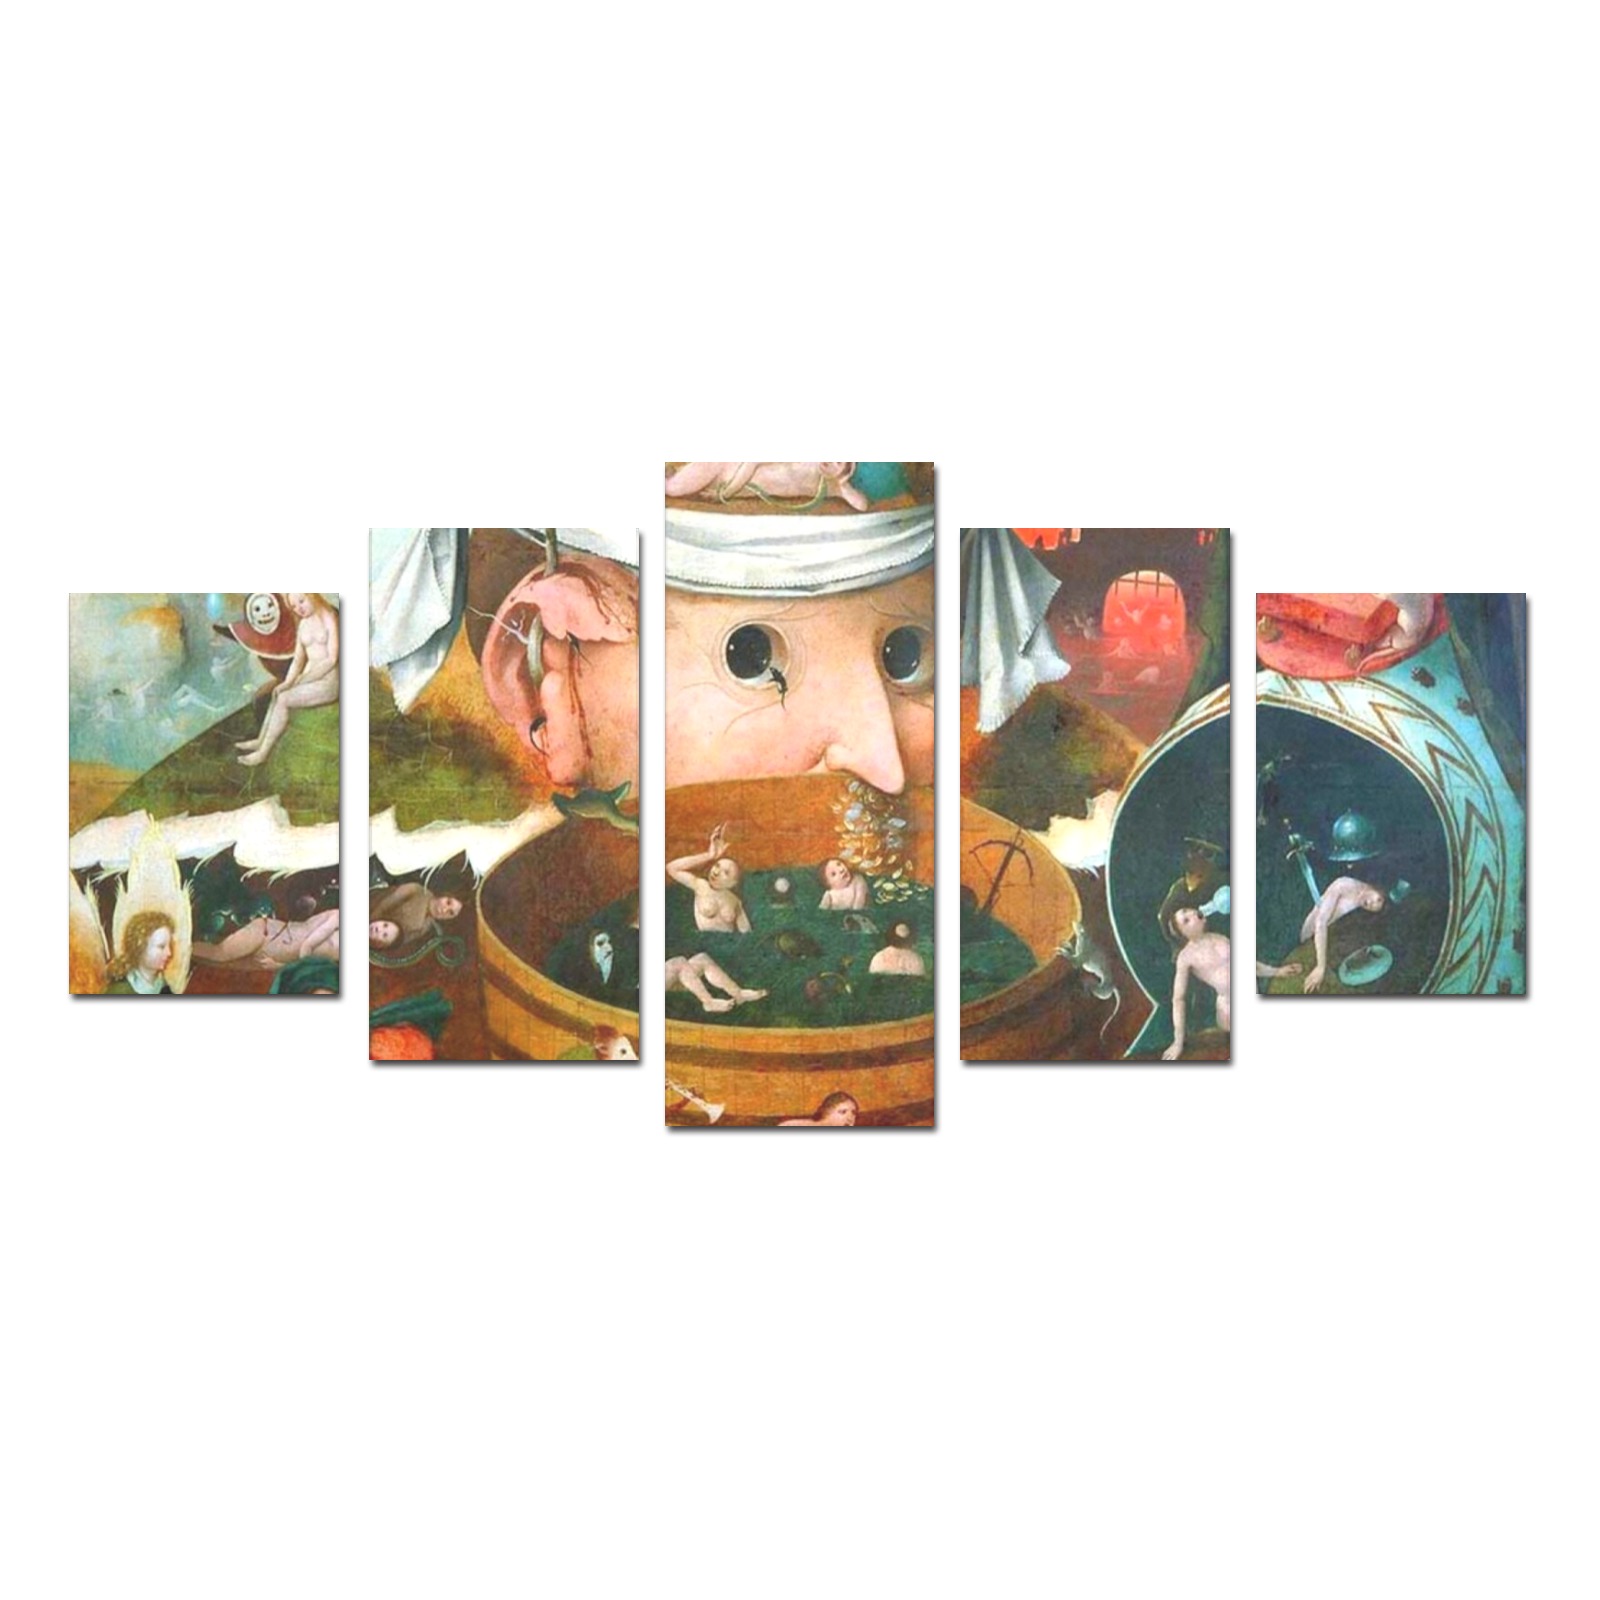 Hieronymus Bosch-The Vision of Tondal Canvas Print Sets D (No Frame)